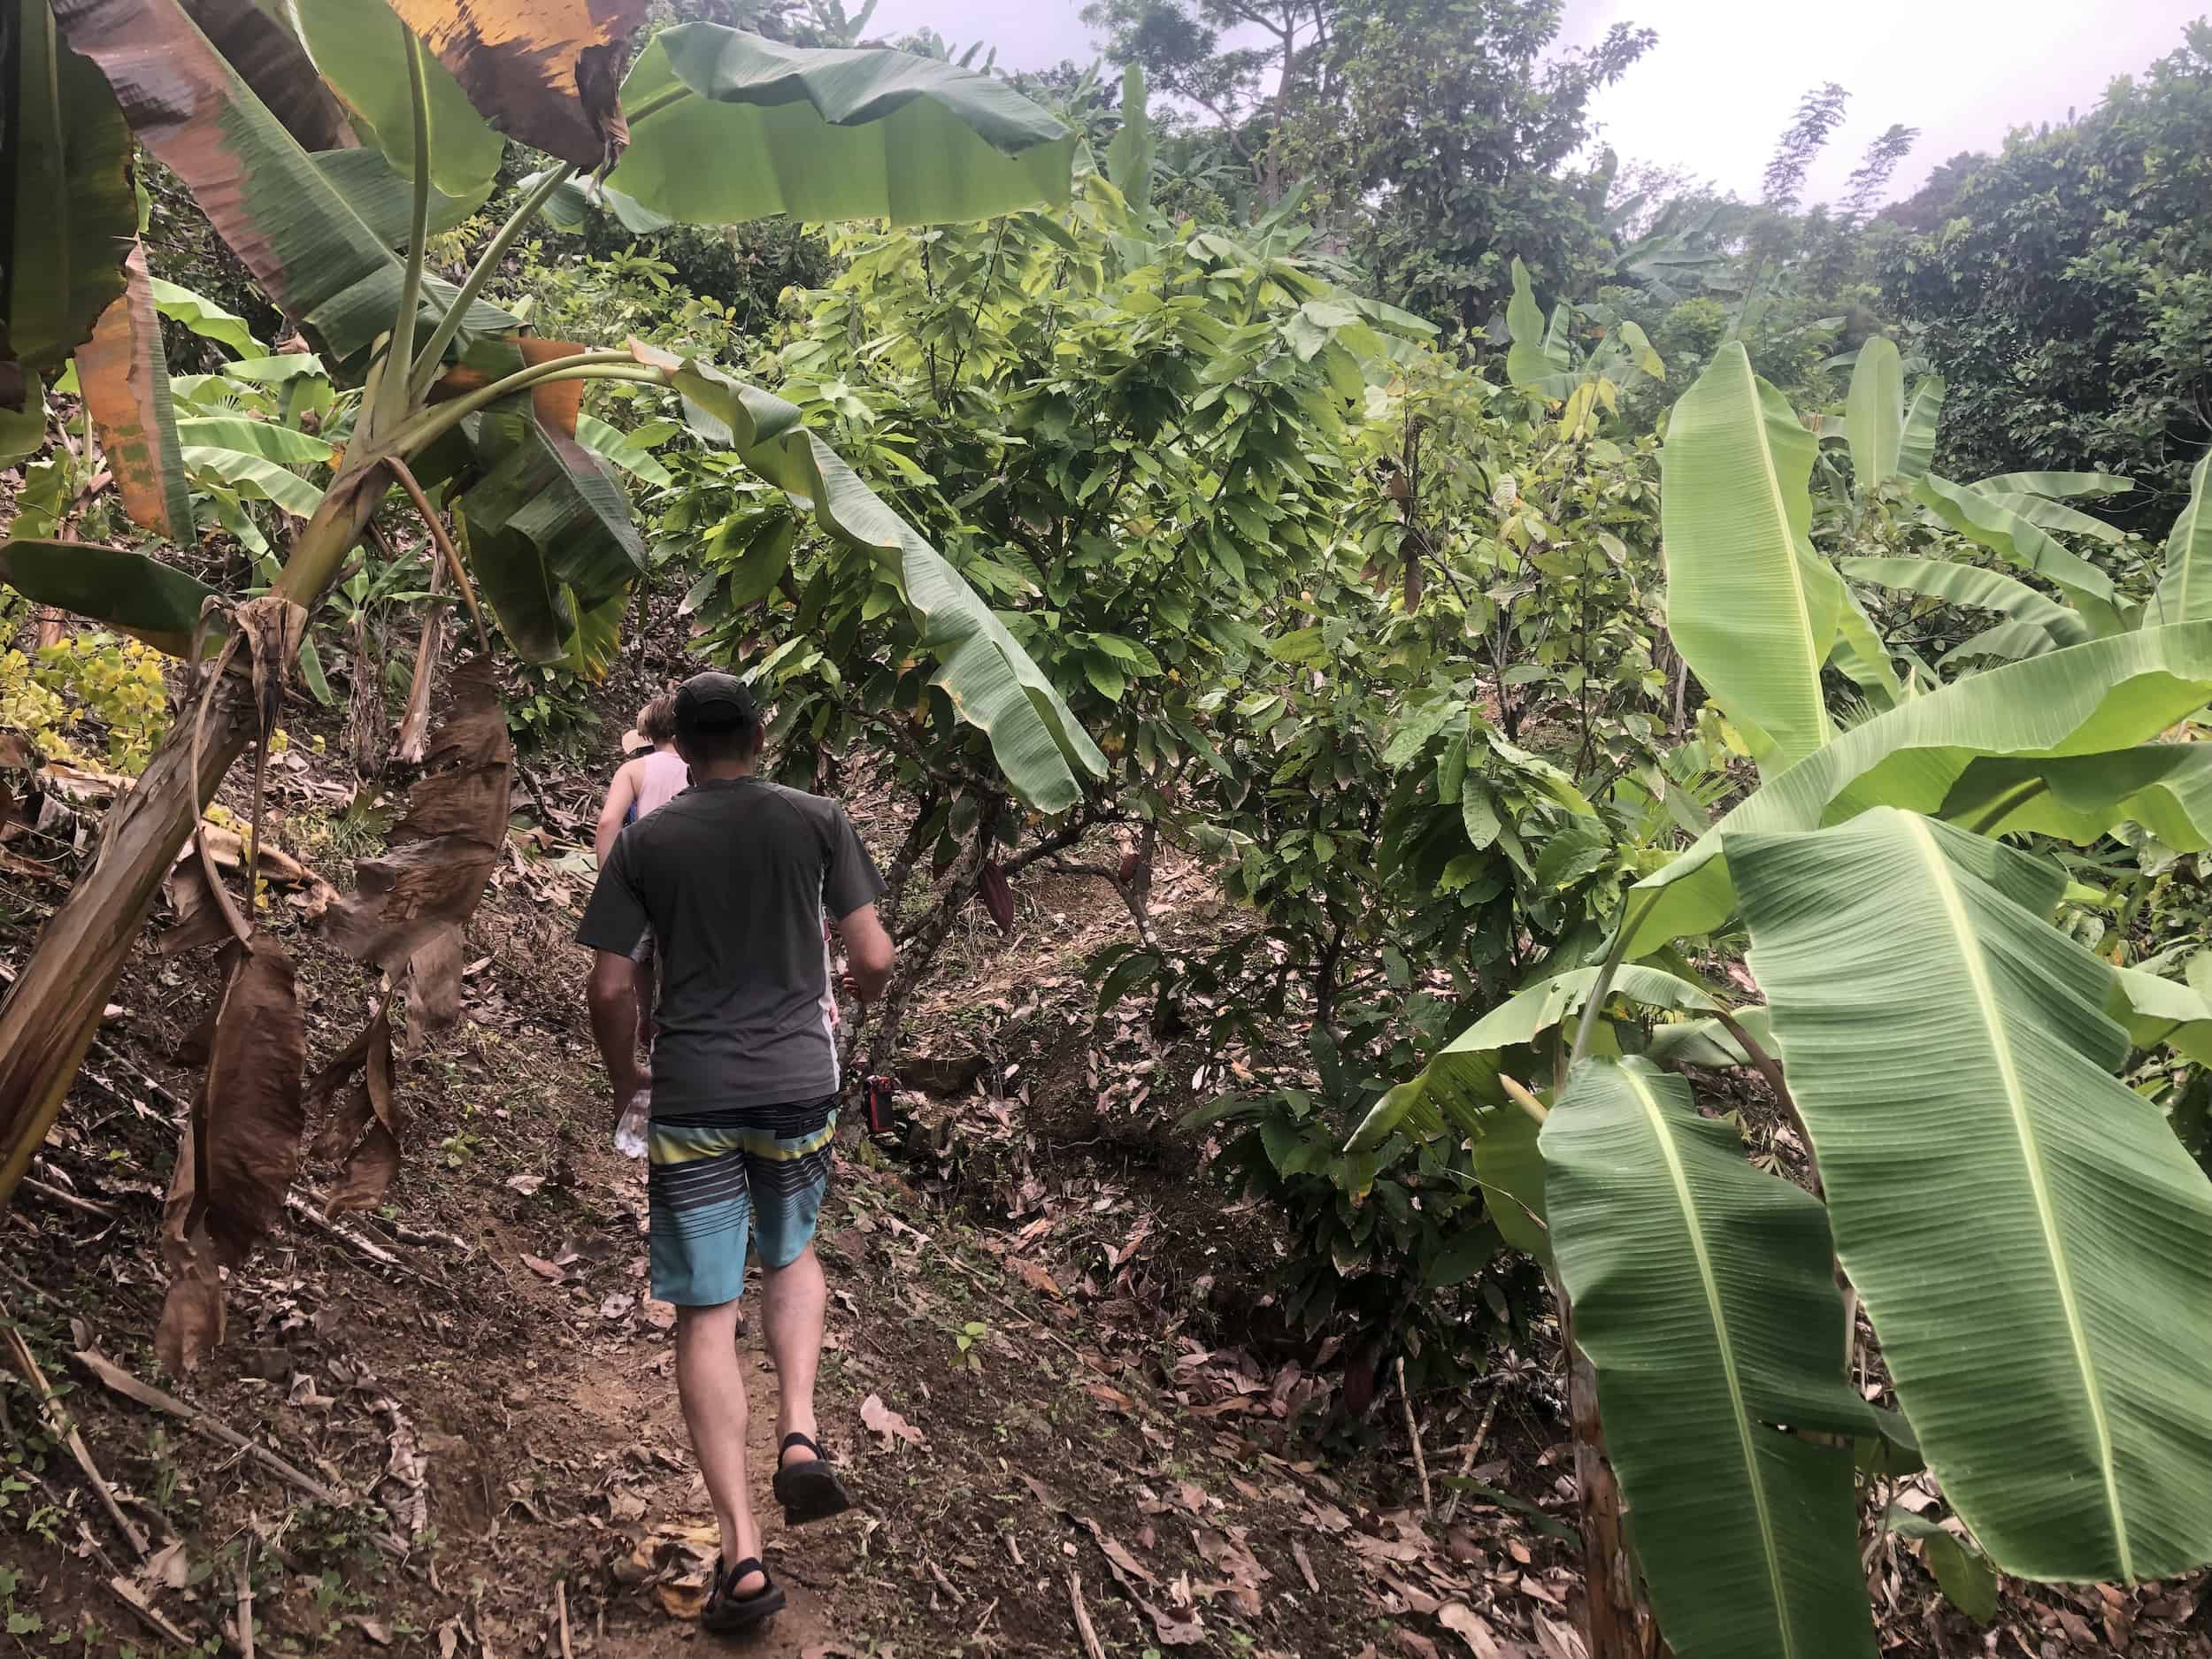 Continuing the hike on the cacao tour